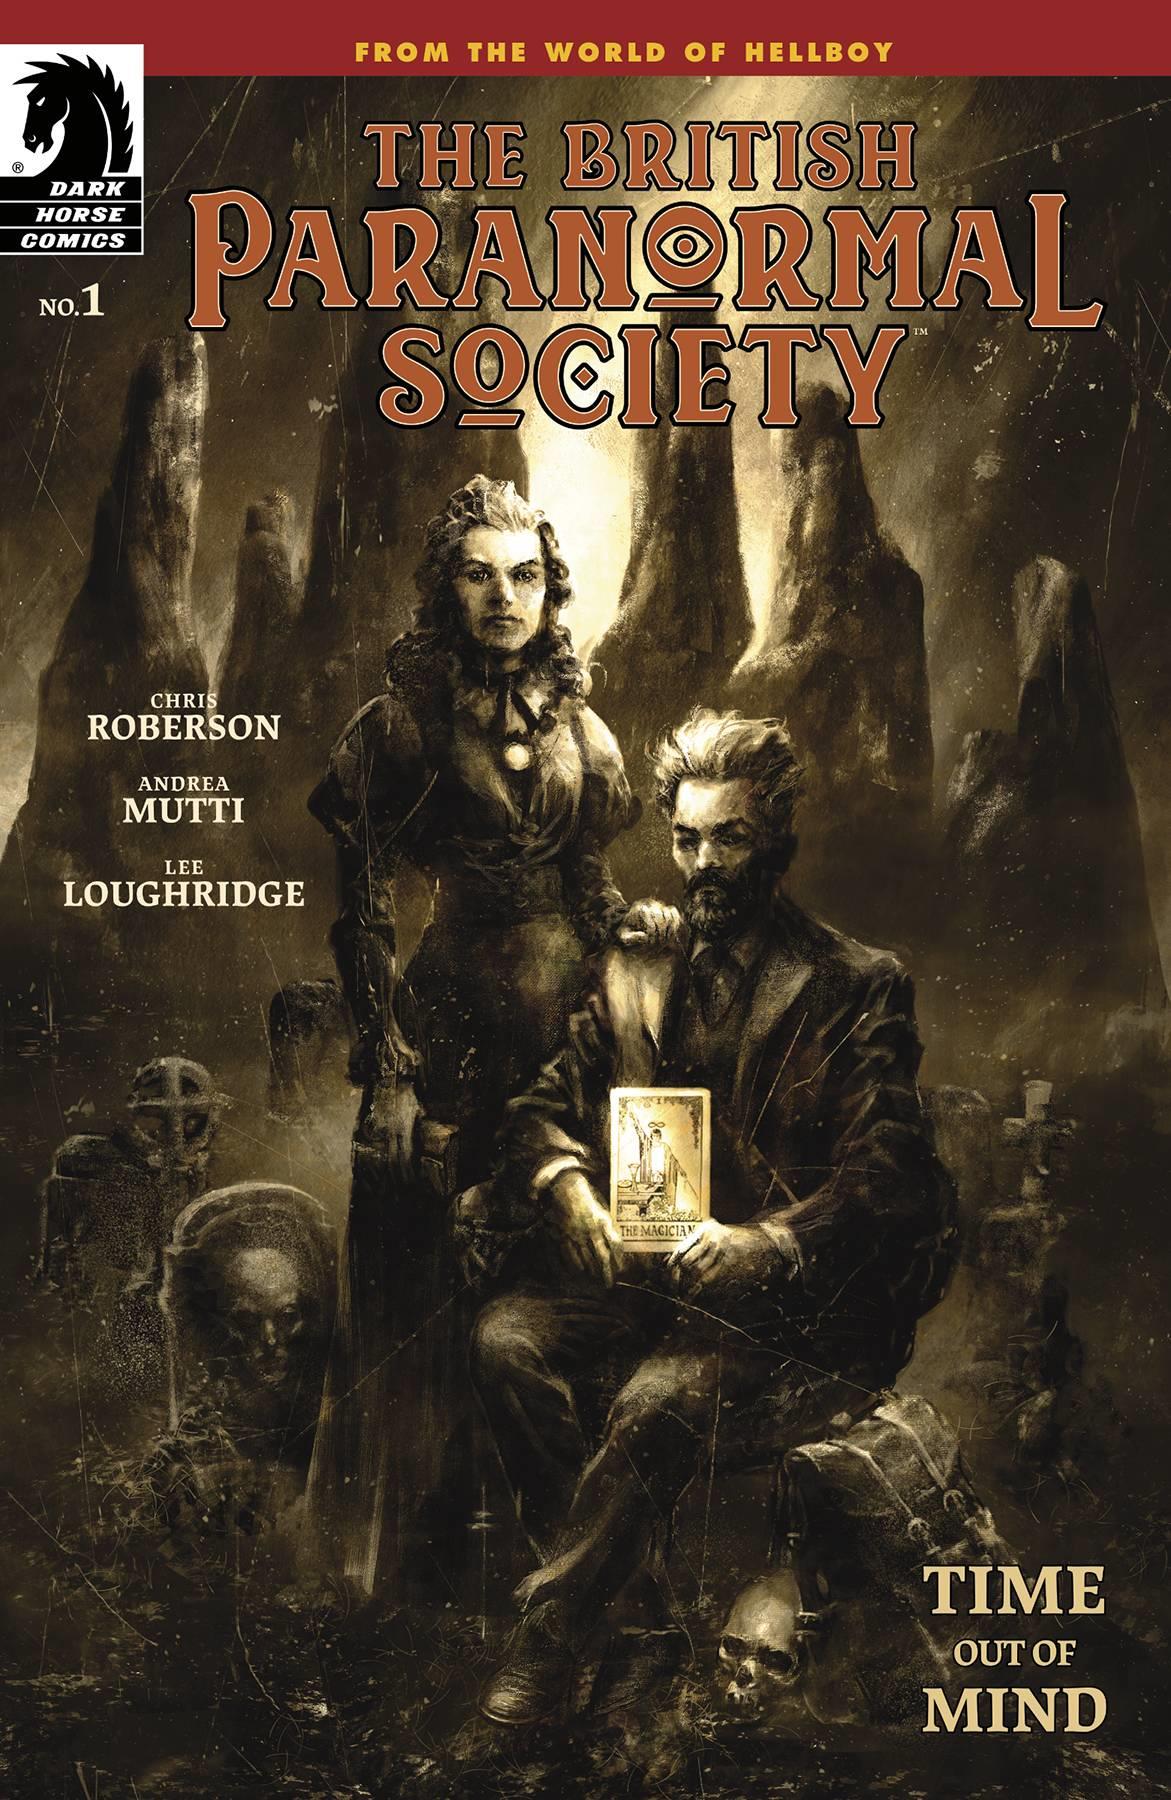 British Paranormal Society Time Out Of Mind #1 (of 4) Dark Horse Comics Comic Book